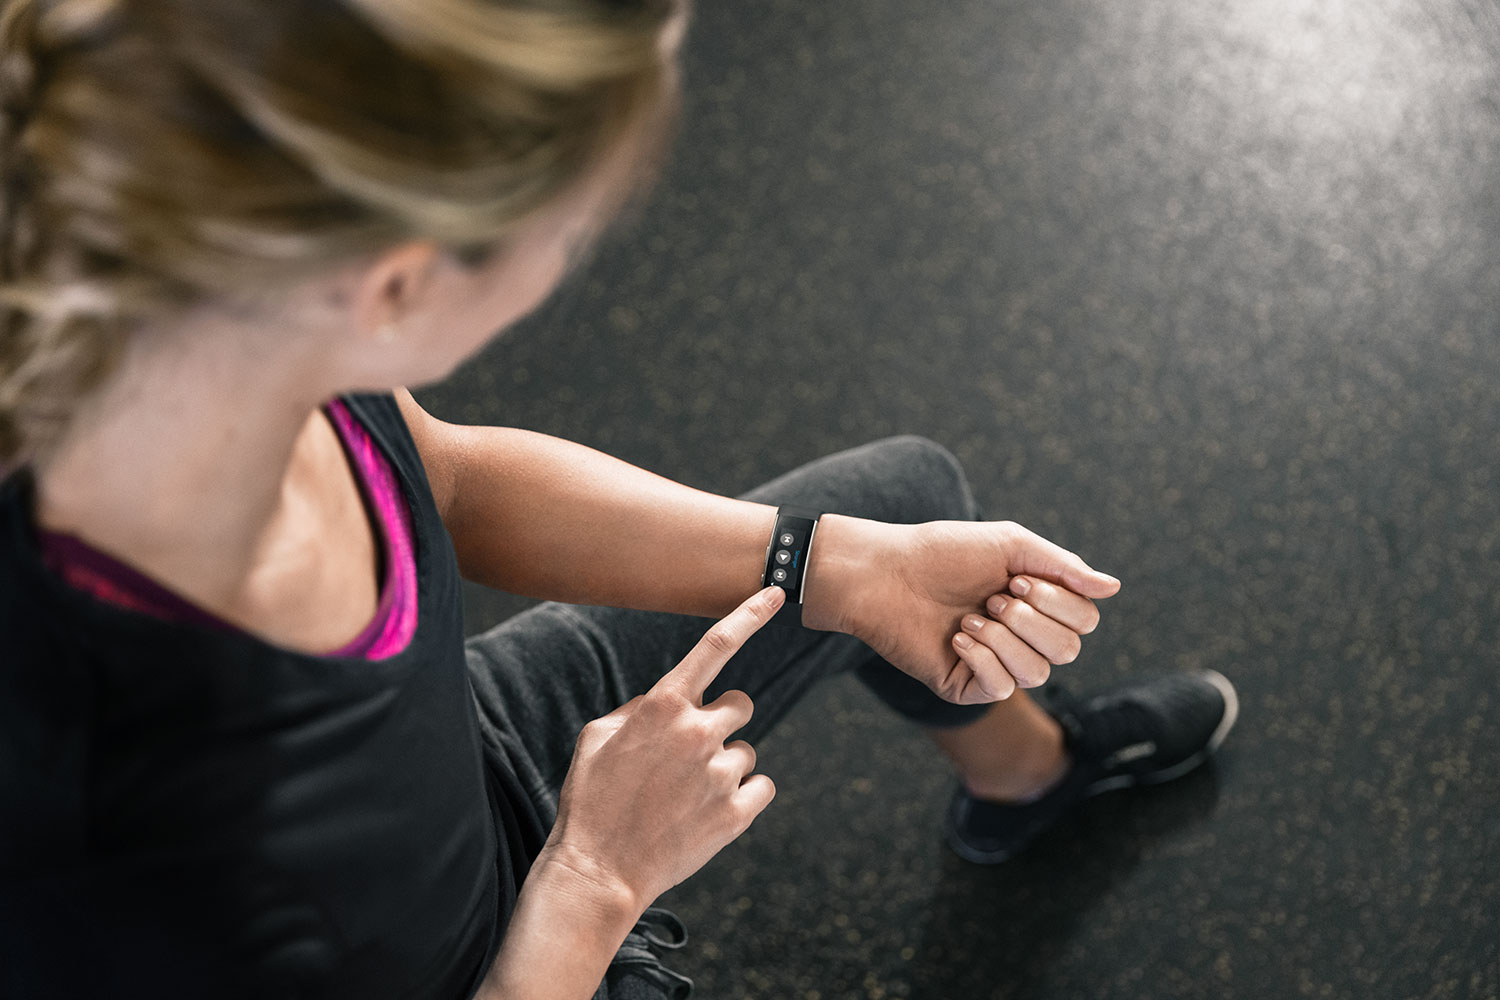 A girl is using the new Microsoft Band and music controls at the gym